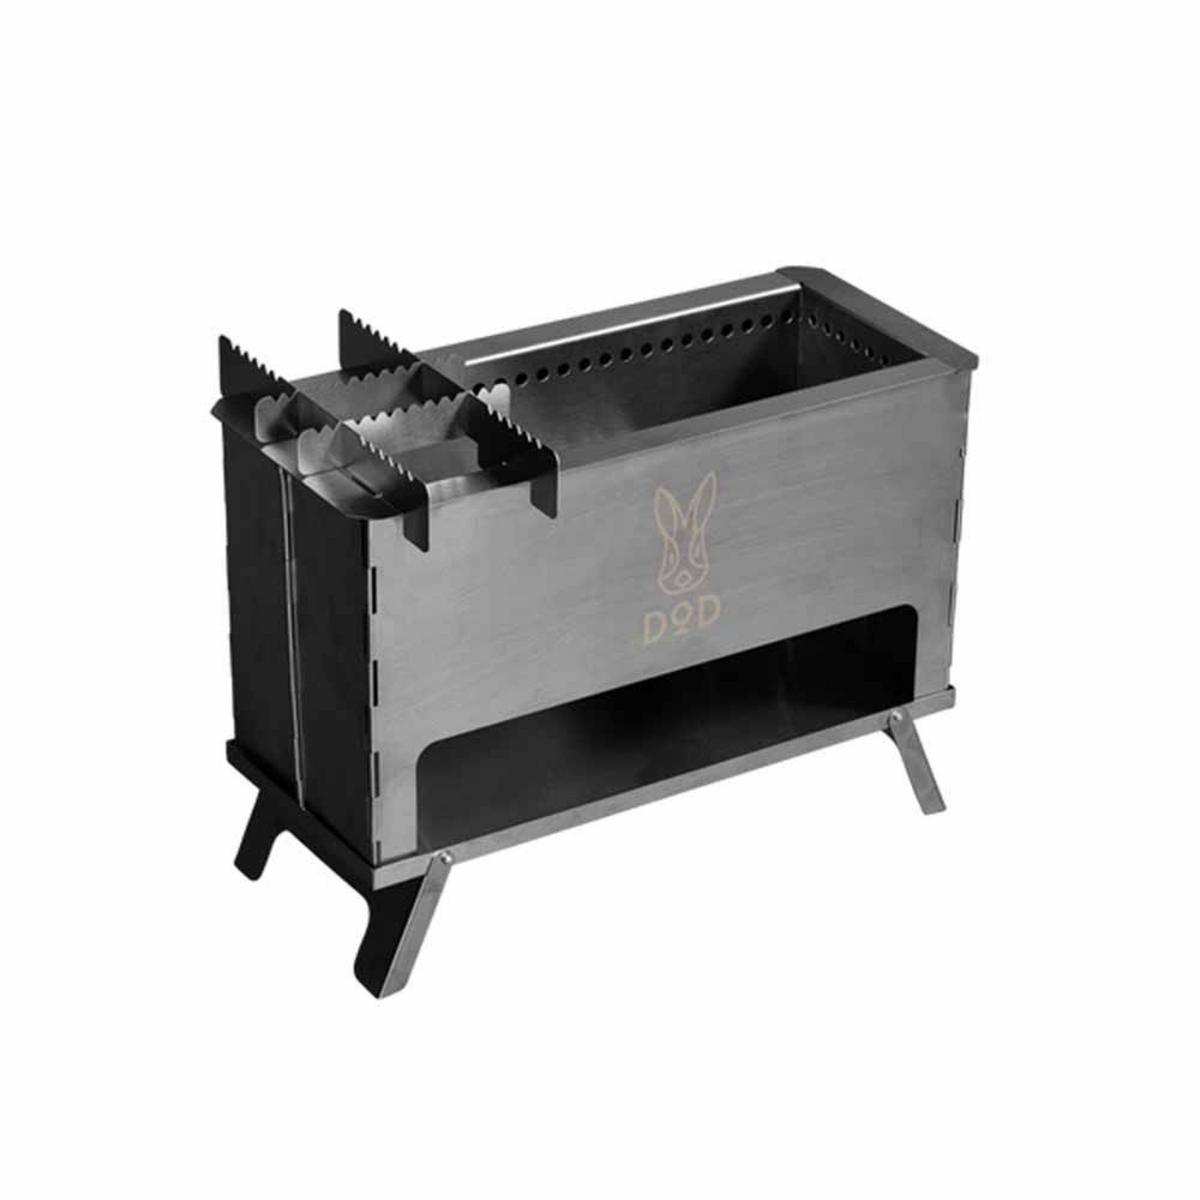 DOD Outdoors Pera Moe Fire Stove - Silver